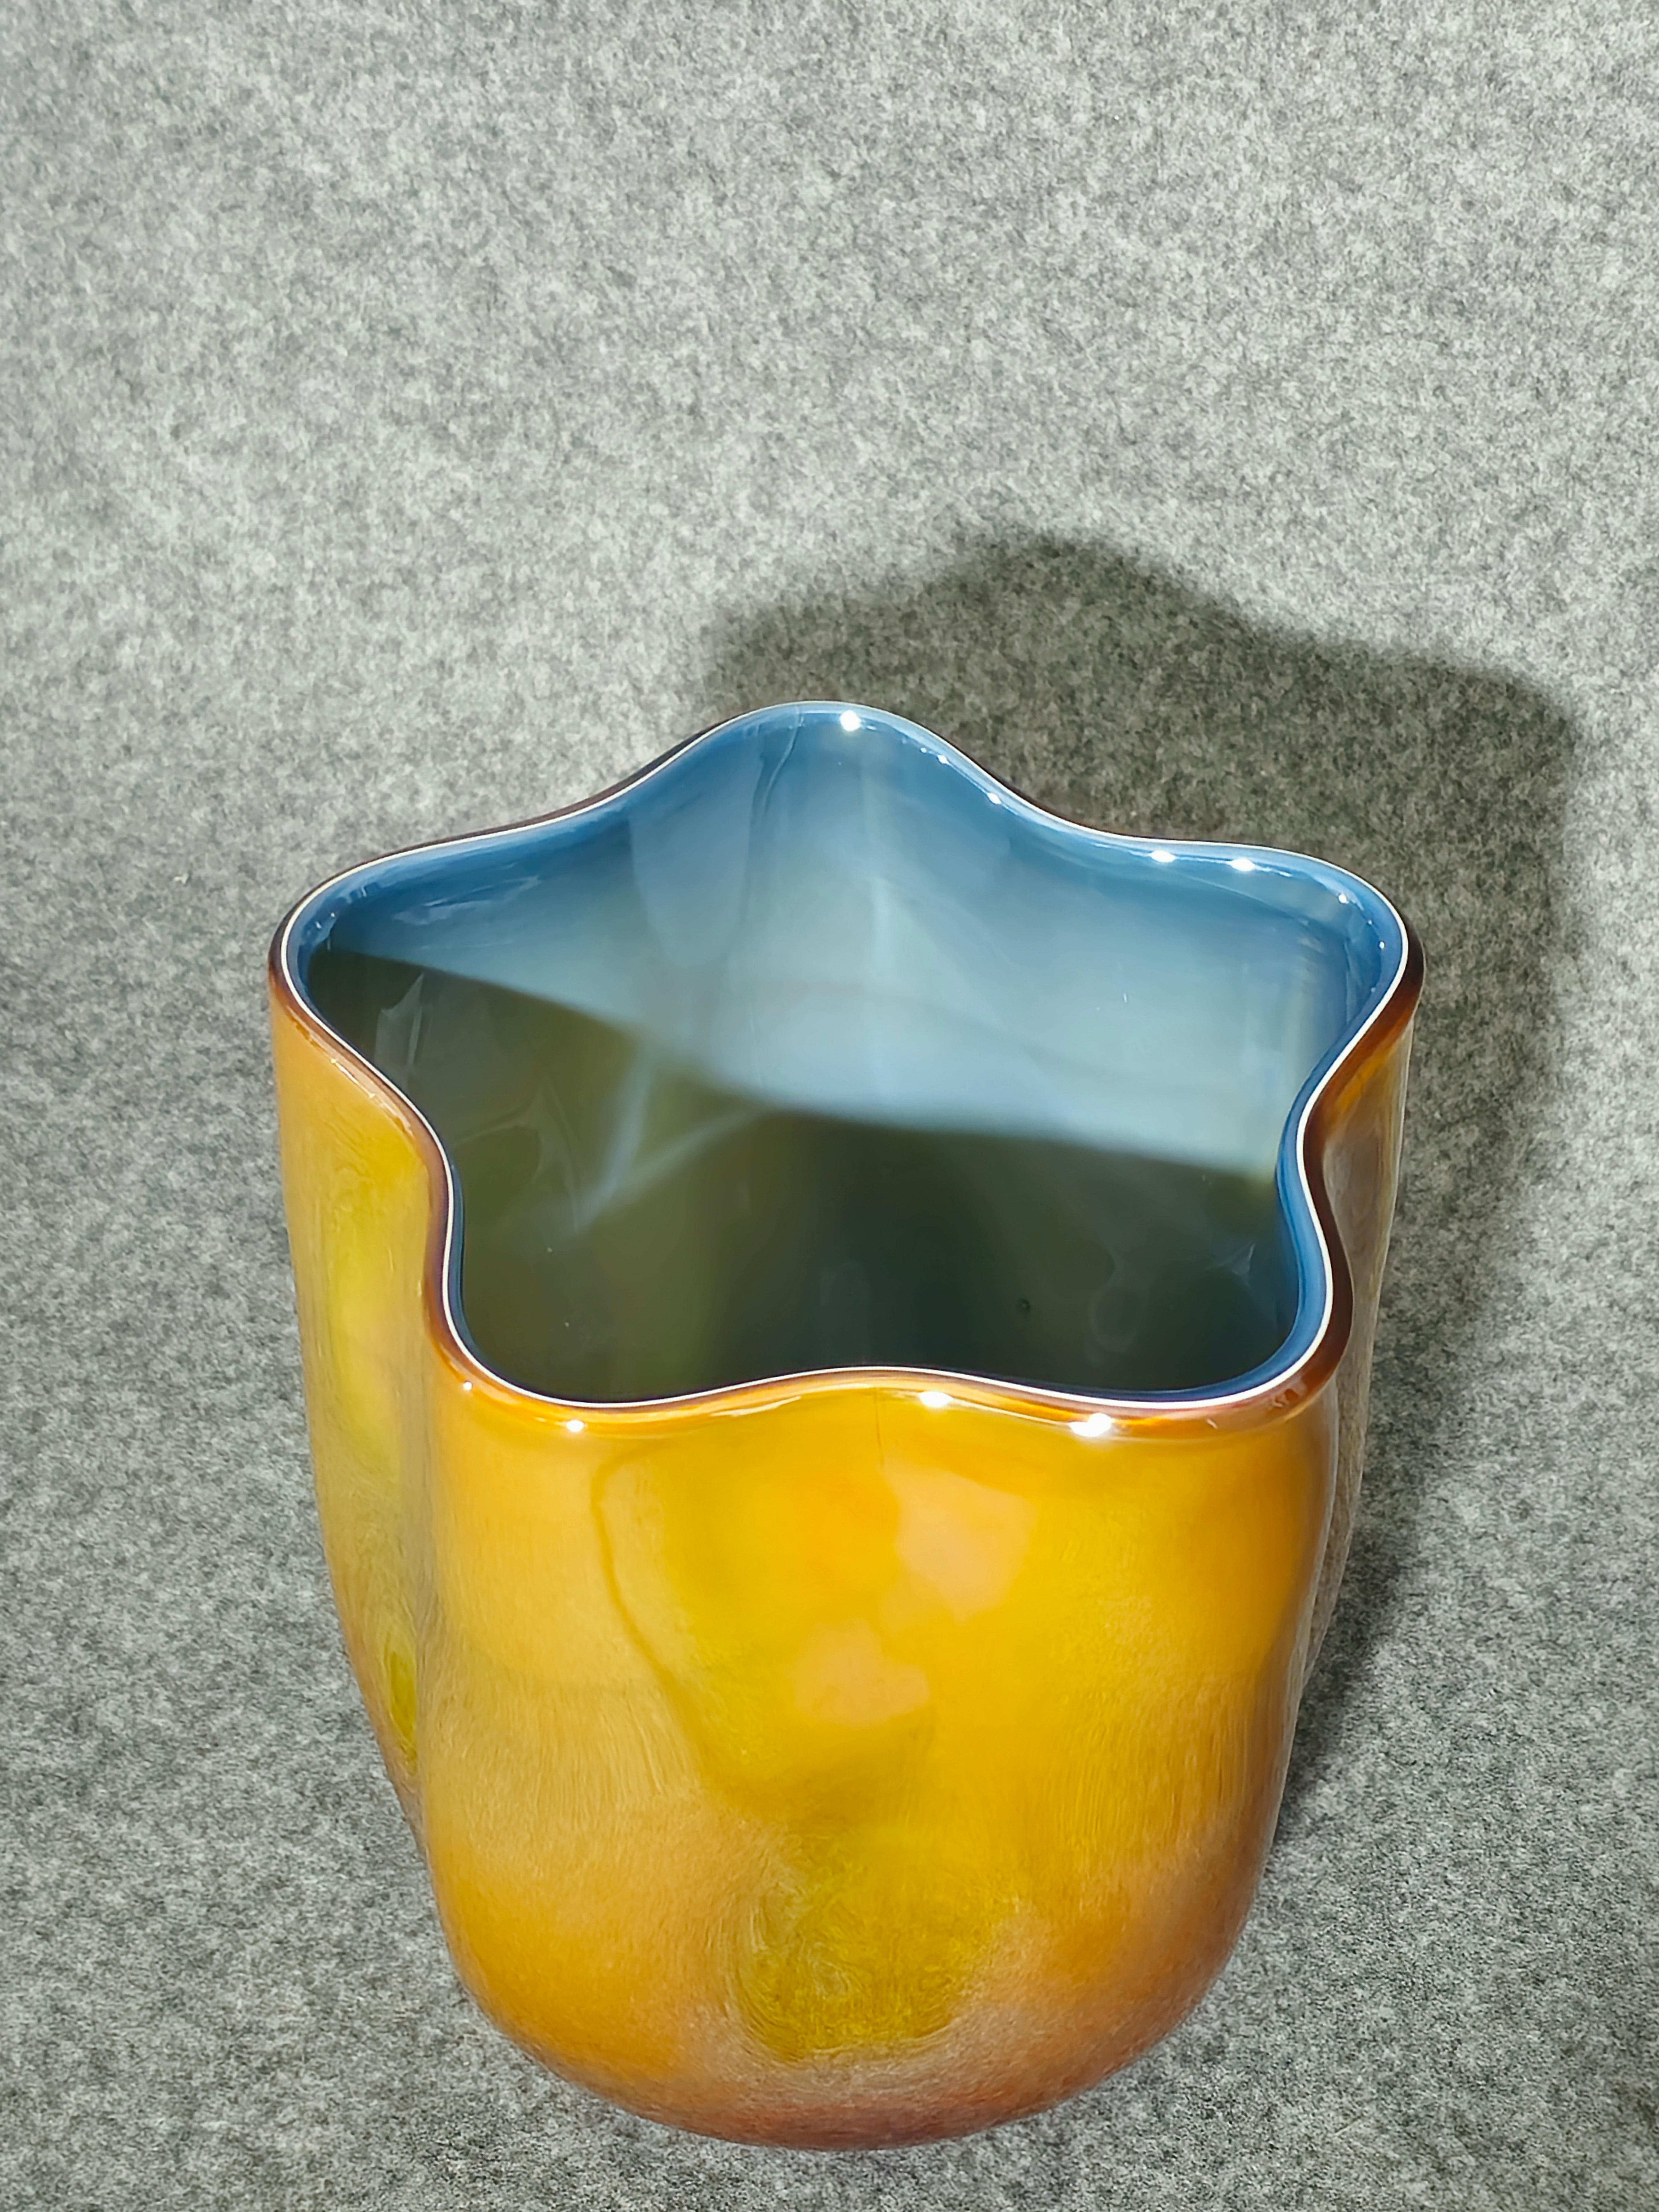 Decorative Object Vase Ambra Murano Glass Midcentury Design Italy 1970s For Sale 2